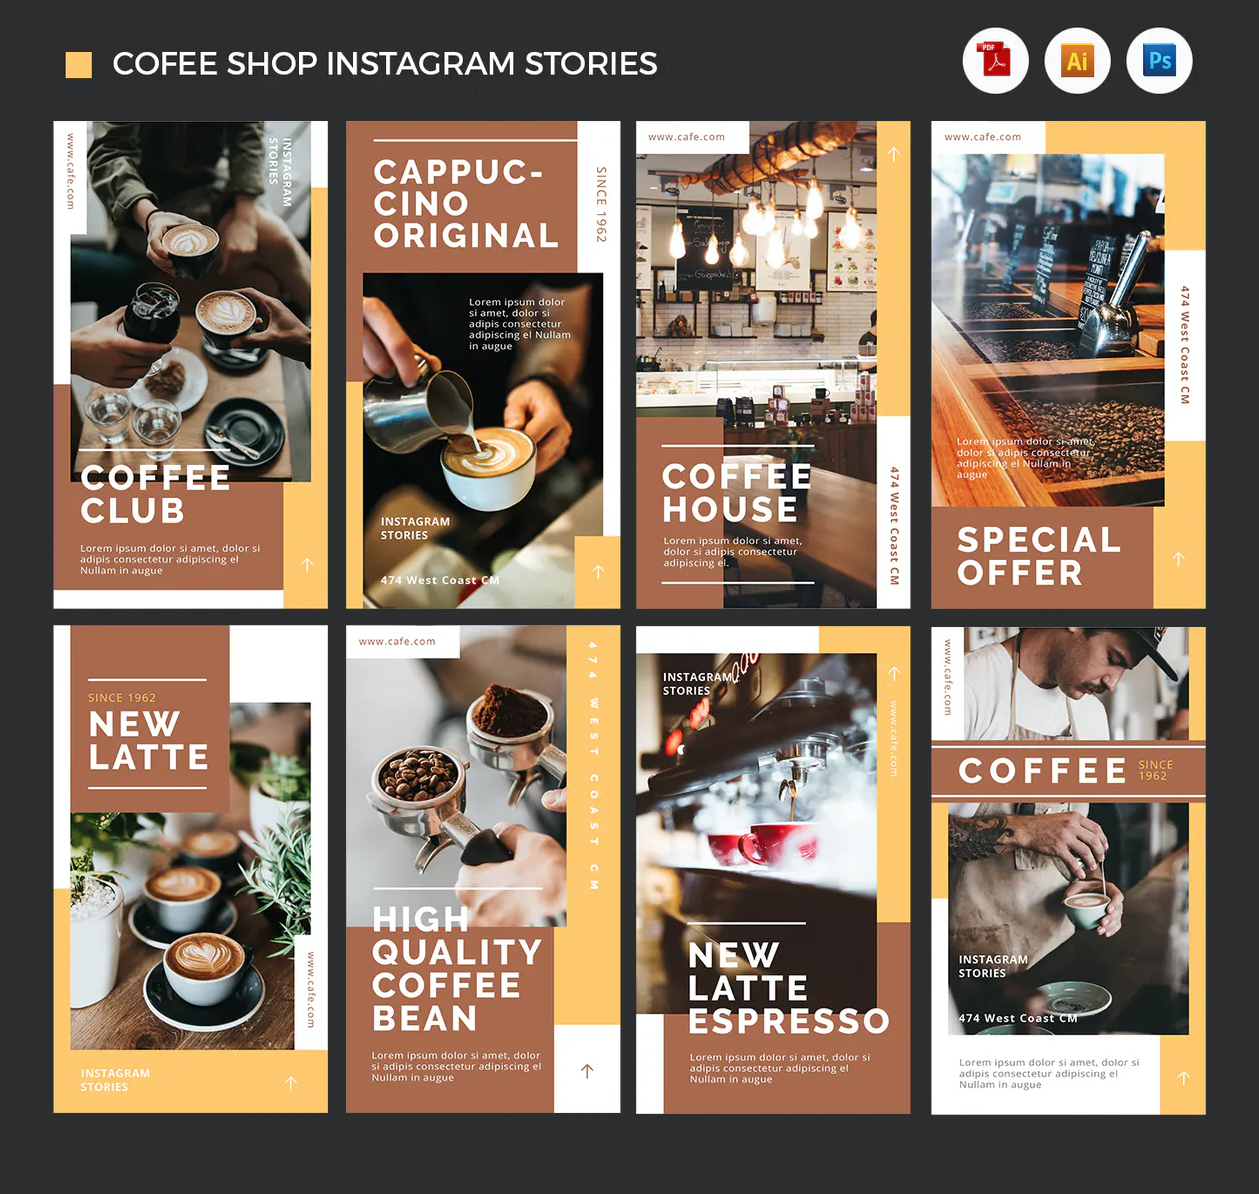 Coffee shop Instagram story templates